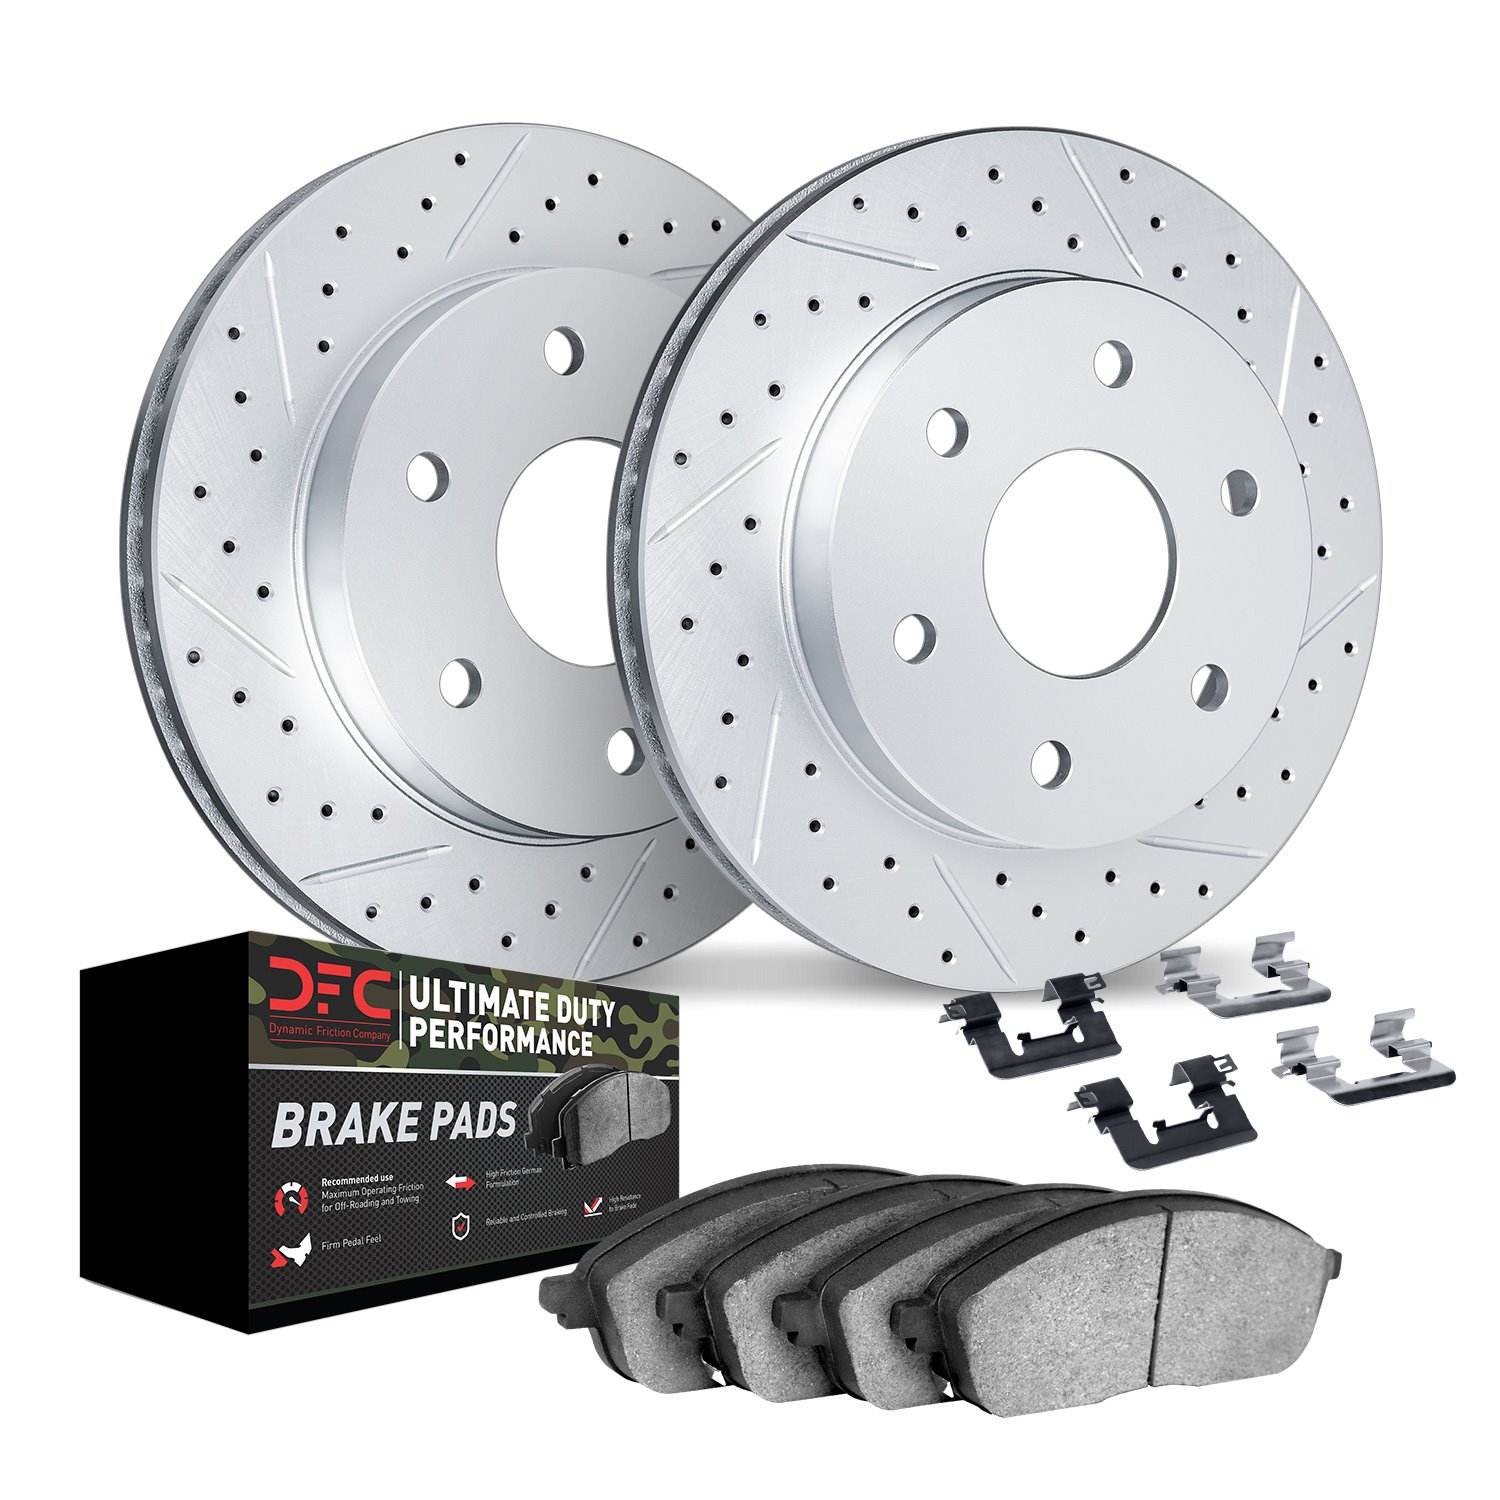 2412-54070 Geoperformance Drilled/Slotted Brake Rotors with Ultimate-Duty Brake Pads Kit & Hardware, 2012-2020 Ford/Lincoln/Merc